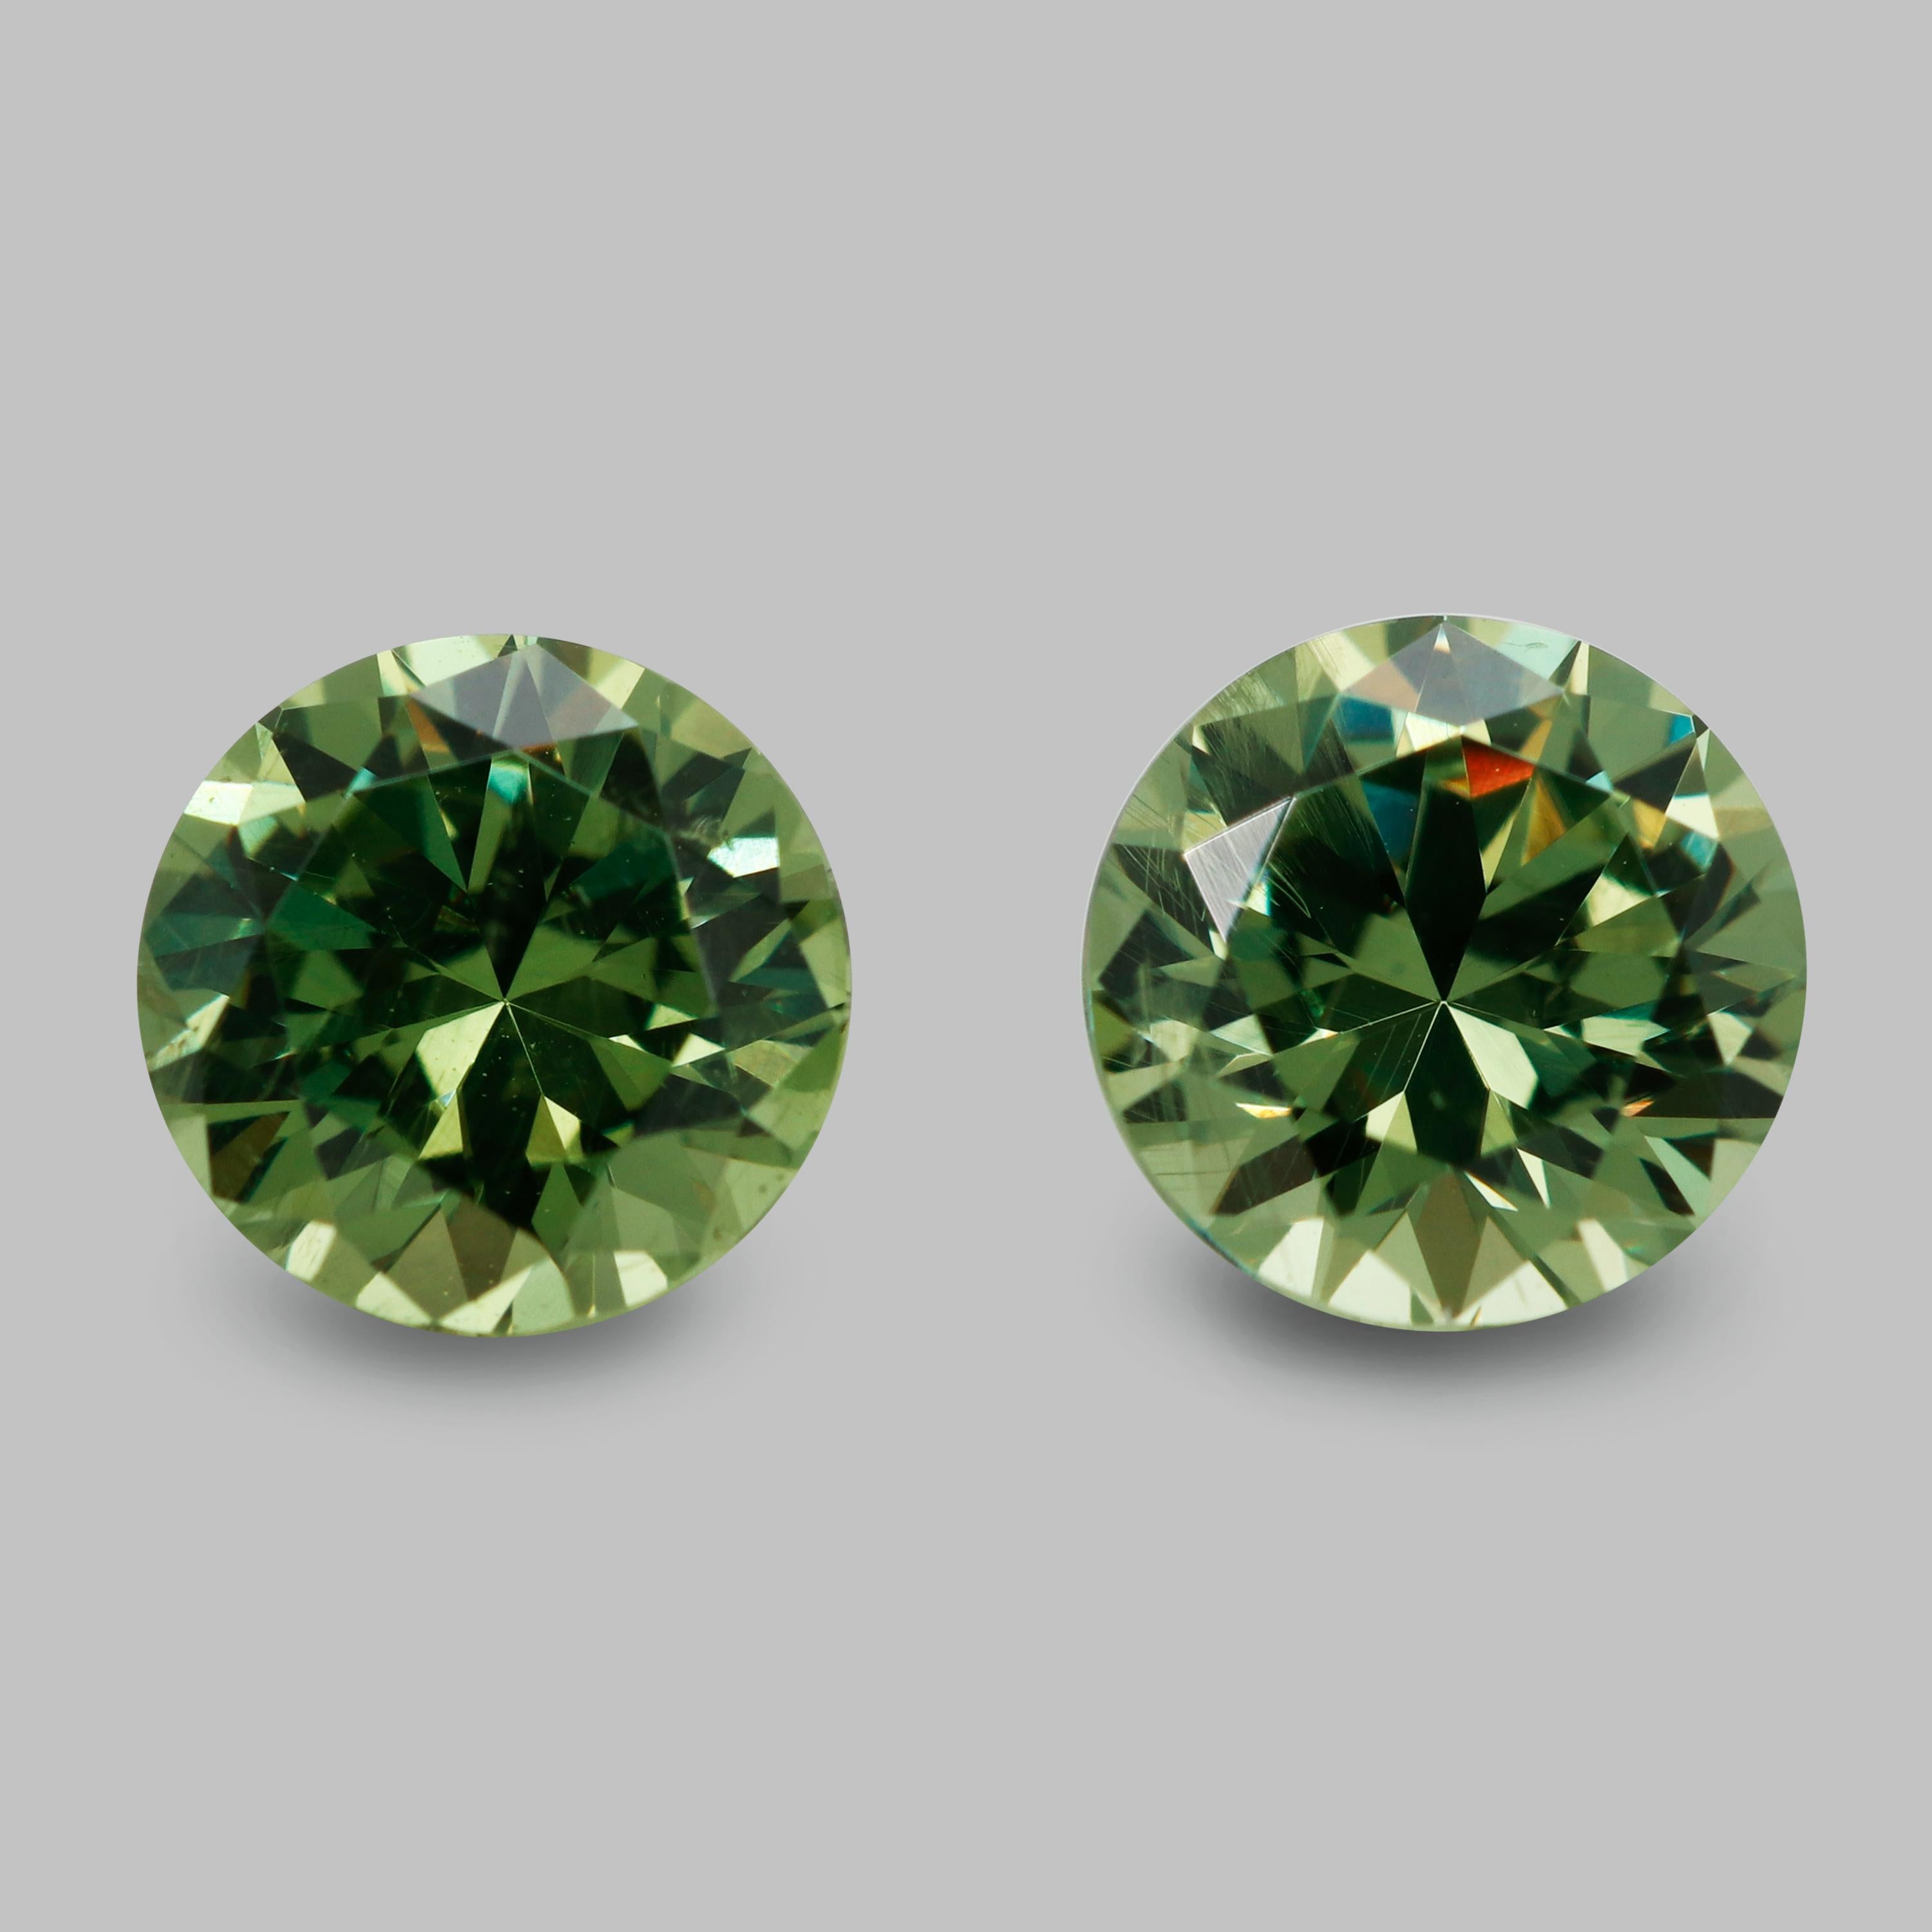 Ural Mountains of  Russia is the most important and consistent source of the rarest variety of Garnets - Demantoid. 
The stones from this region are famous for  their vivid green hue, high dispersion and characteristic horsetail 